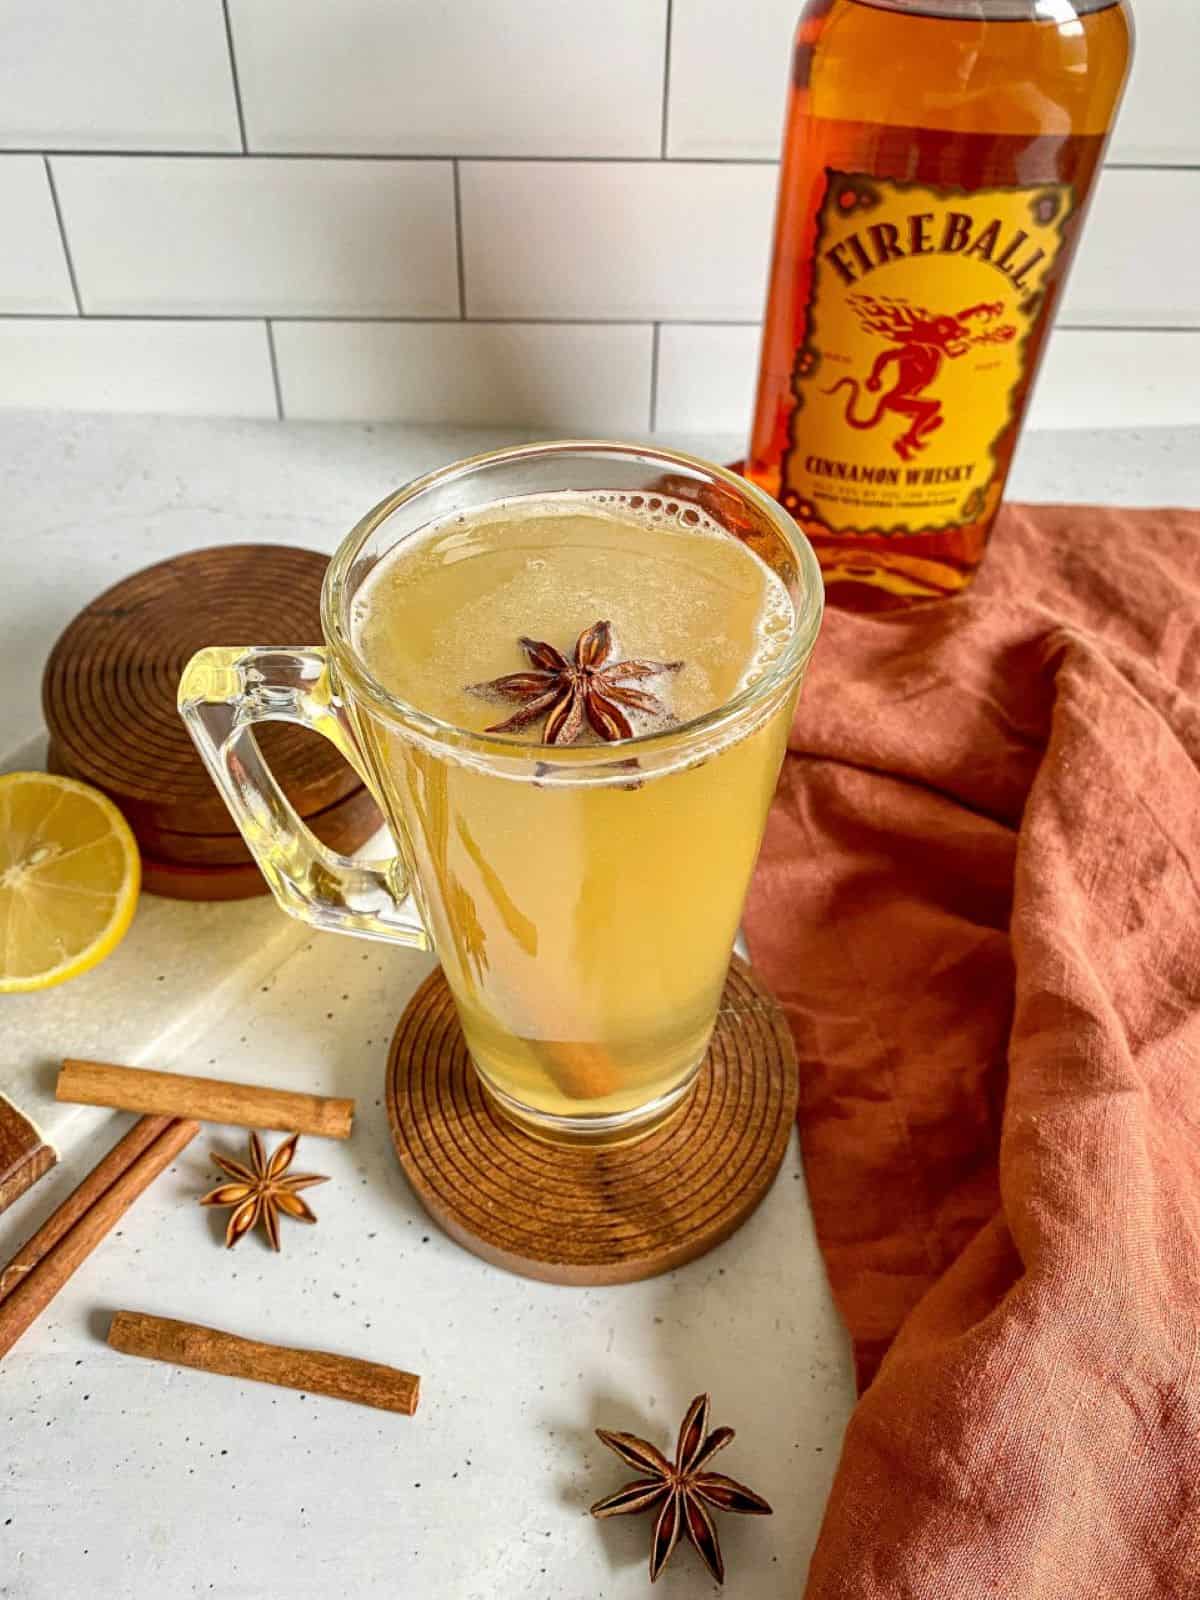 Hot Toddy in a clear mug surrounded by sliced lemon and cinnamon sticks. A bottle of Fireball whisky is next to the cocktail.